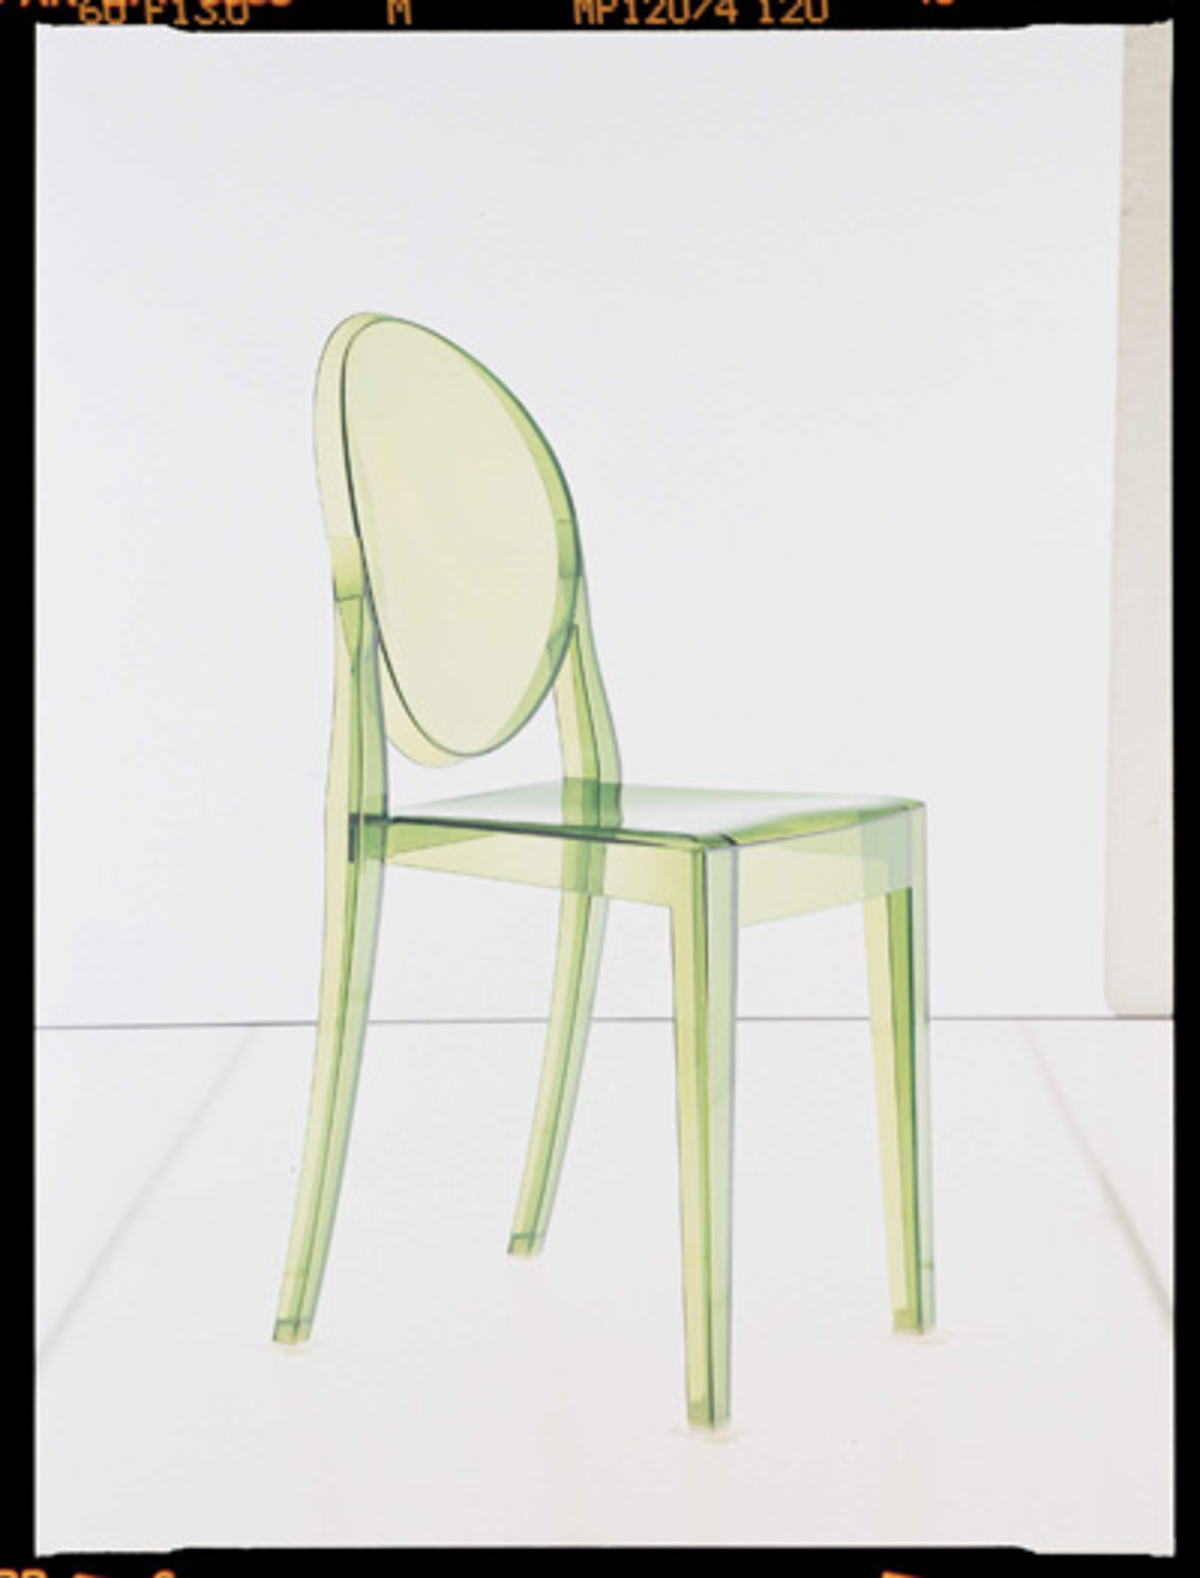 BEST NEW SOURCE FOR COOL NEW FURNITURE: Philippe Starcks Victoria Ghost chair at Miami Modern.